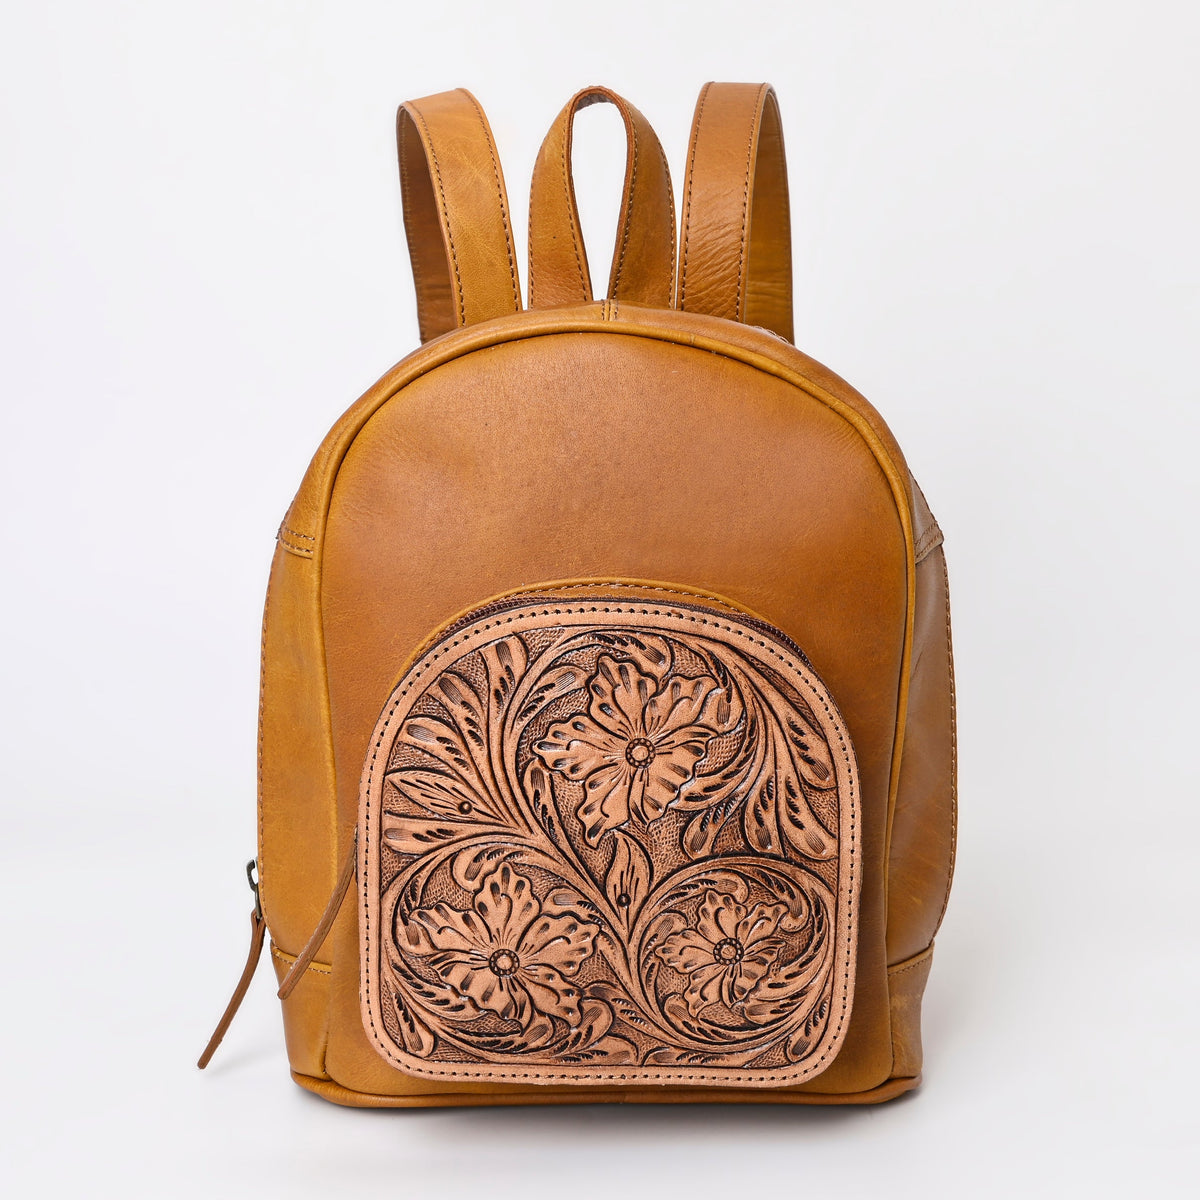 Montana West Genuine Leather Collection Genuine Oily Calf Mini Backpack - Brown - Cowgirl Wear